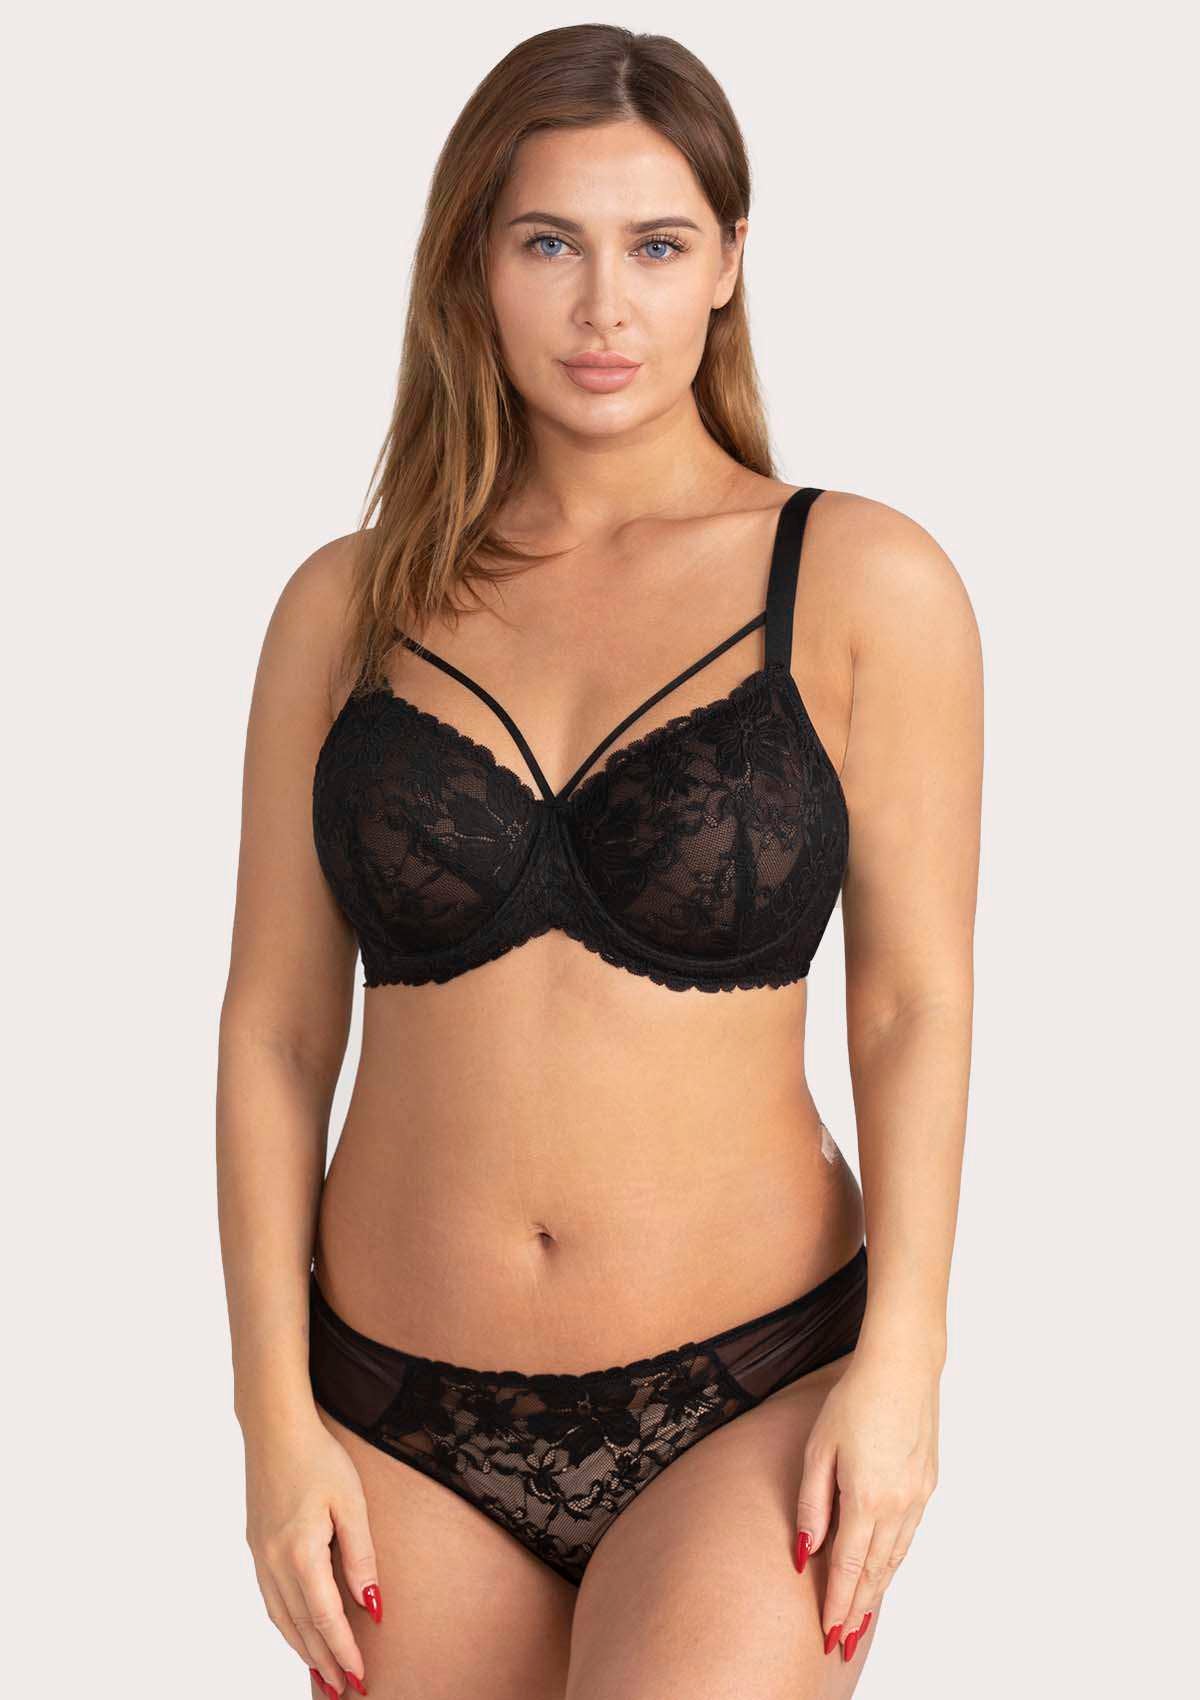 HSIA Pretty In Petals Lace Bra And Panty Set: Non Padded Wired Bra - Black / 34 / DDD/F